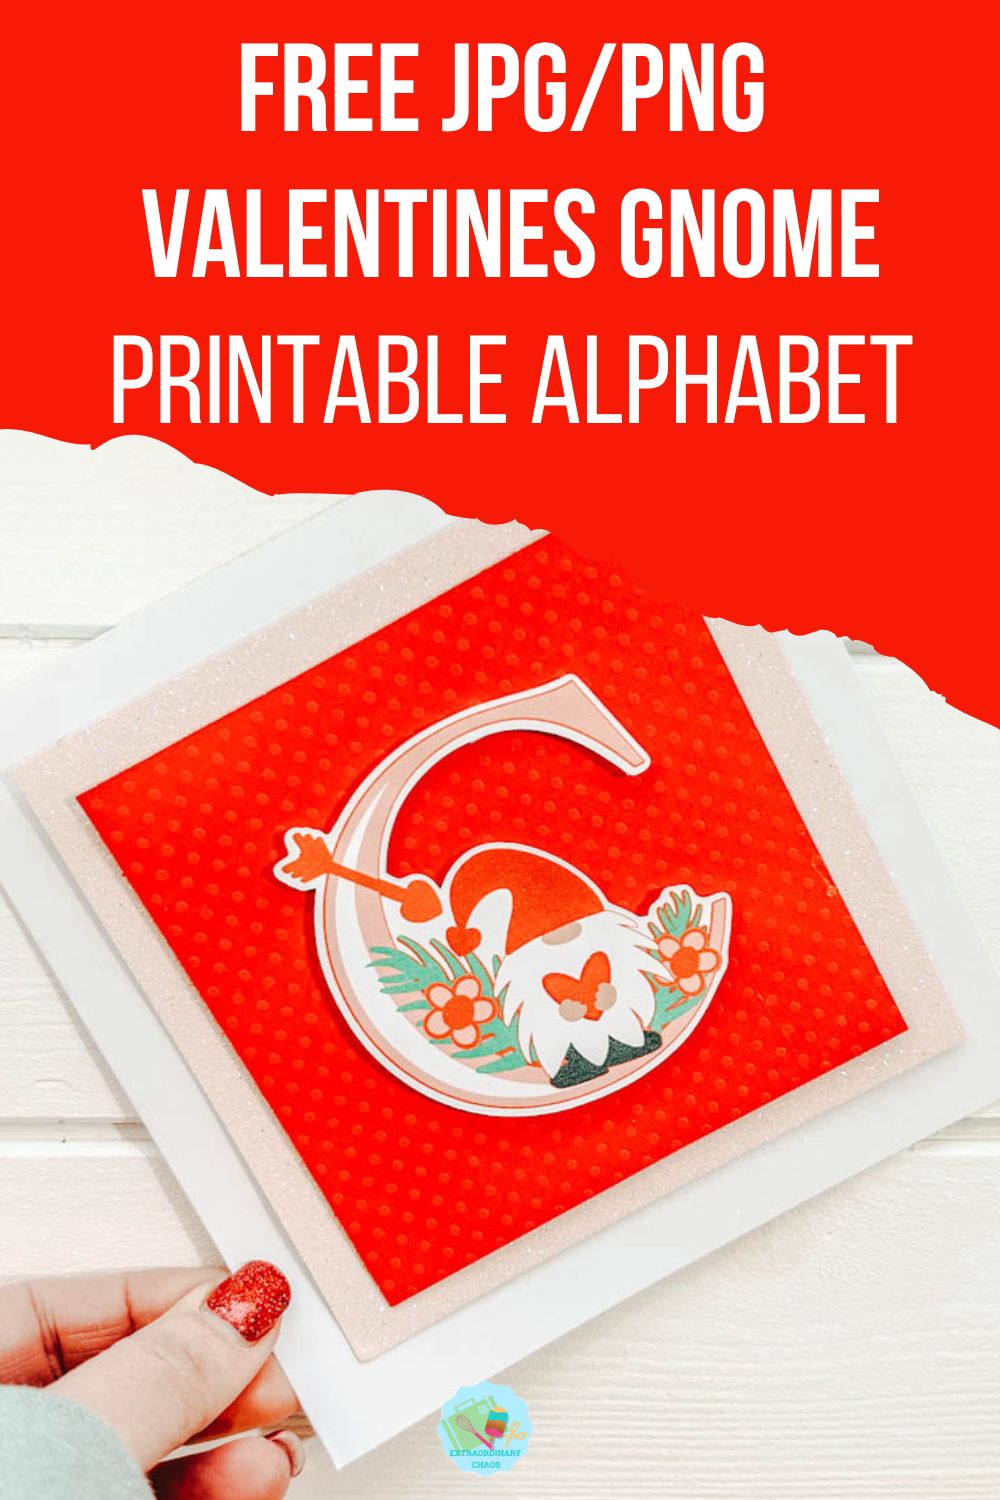 Free JPG PNG Valentines Gnome Printable Alphabet for print and cut projects with Cricut, Silhouette and XTool